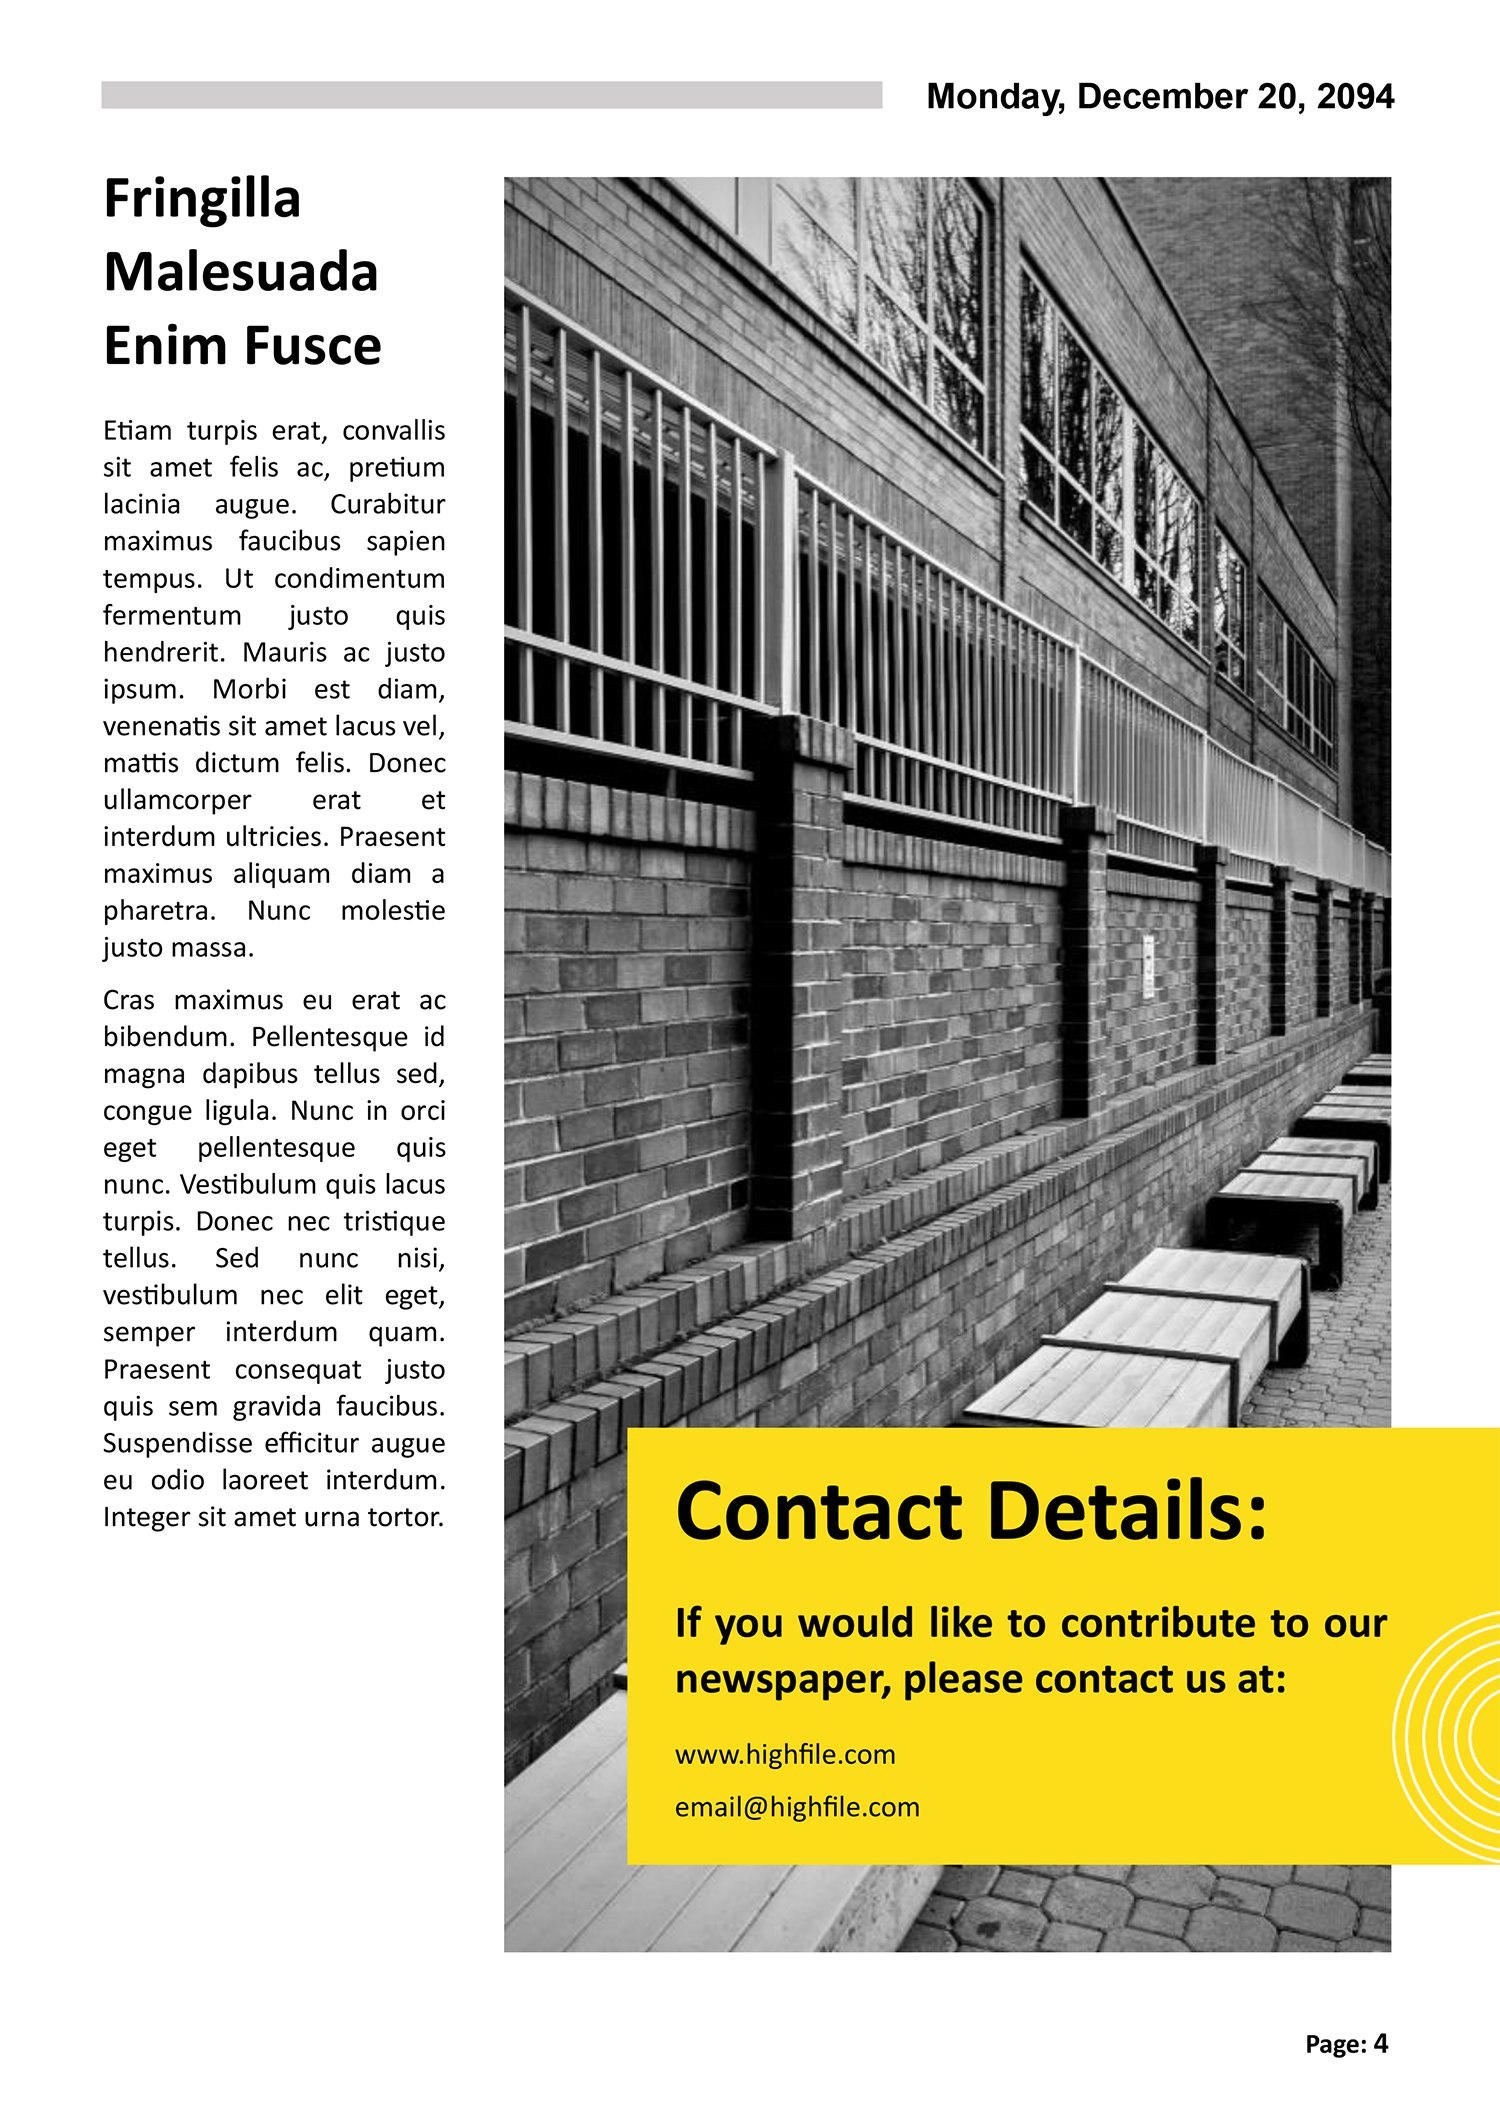 School Newspaper Article Template - Page 04